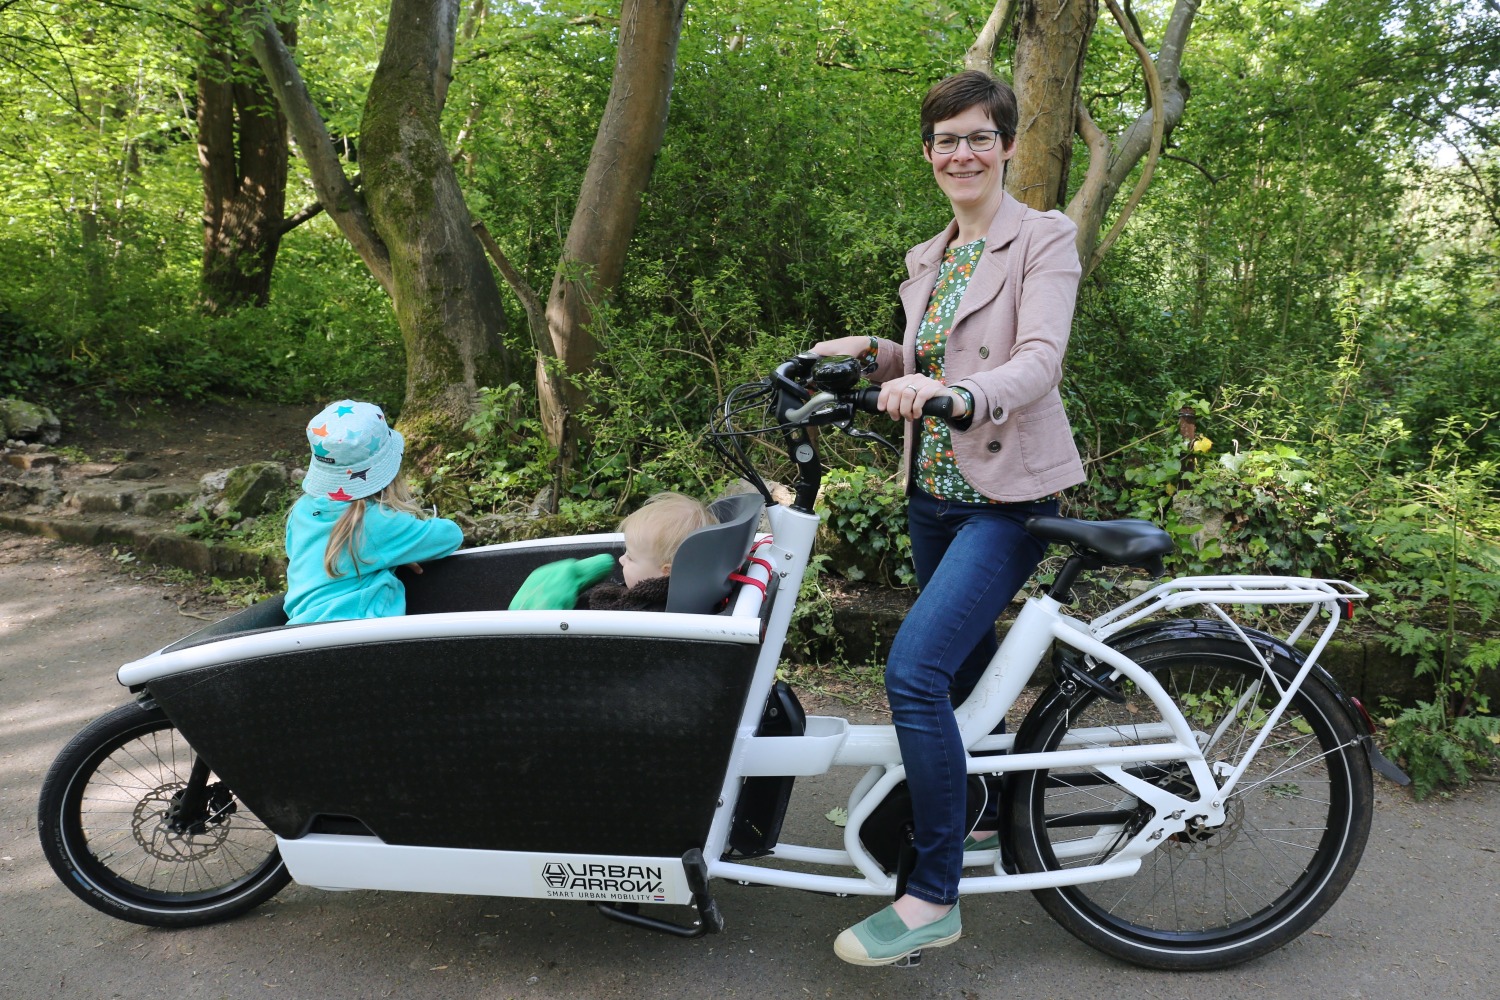 Things to consider before buying an electric cargo bike